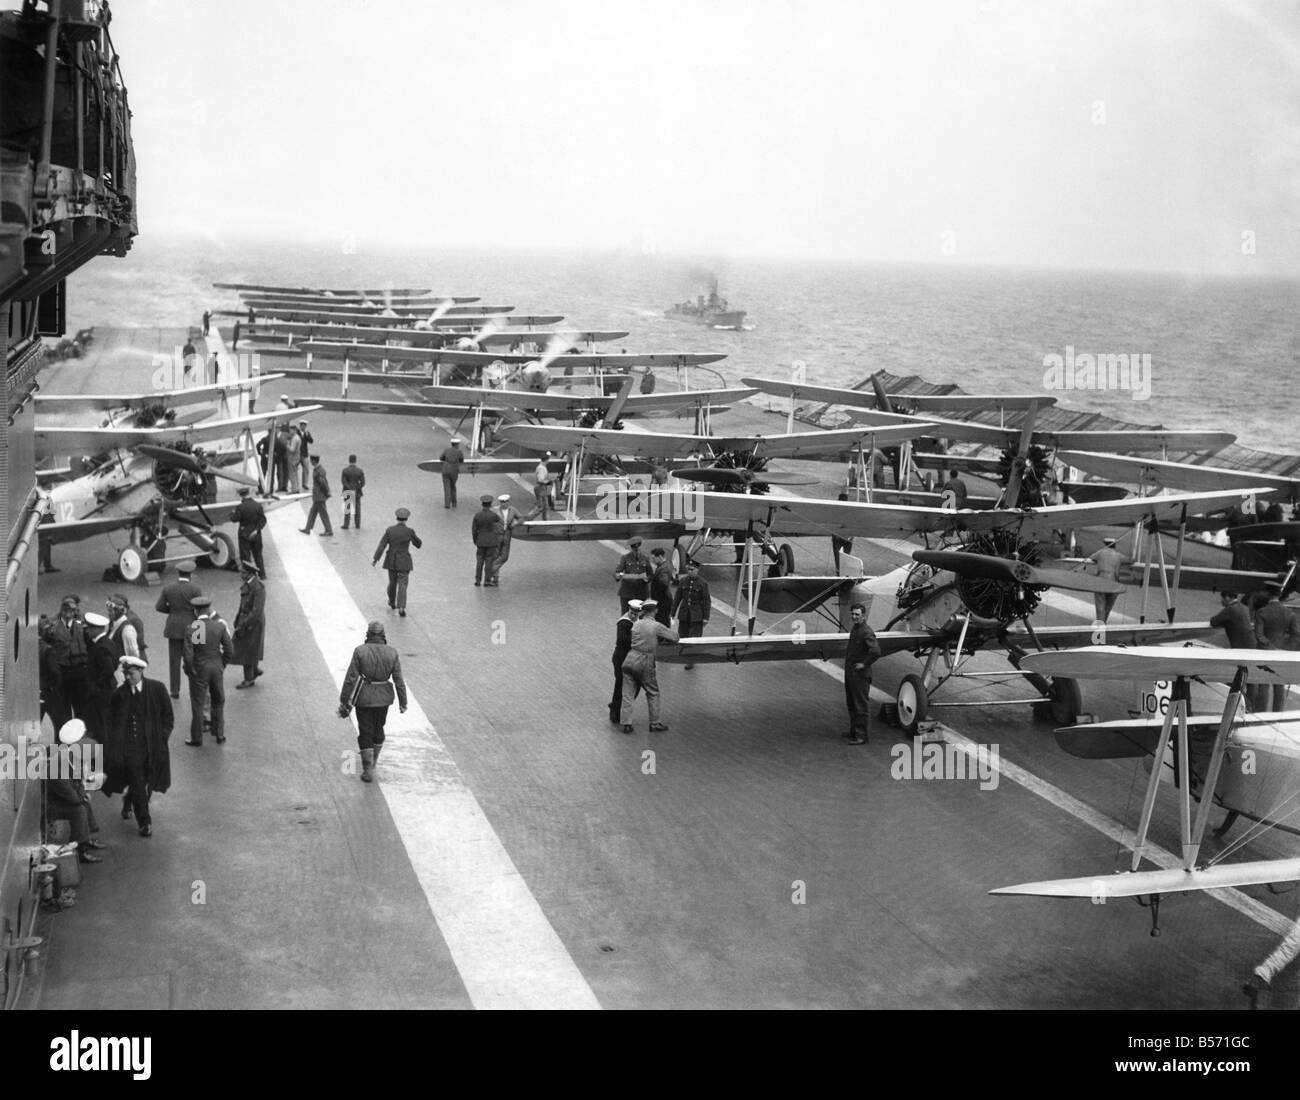 The Flight Deck of the Royal navy aircraft carrier HMS Courageous ...